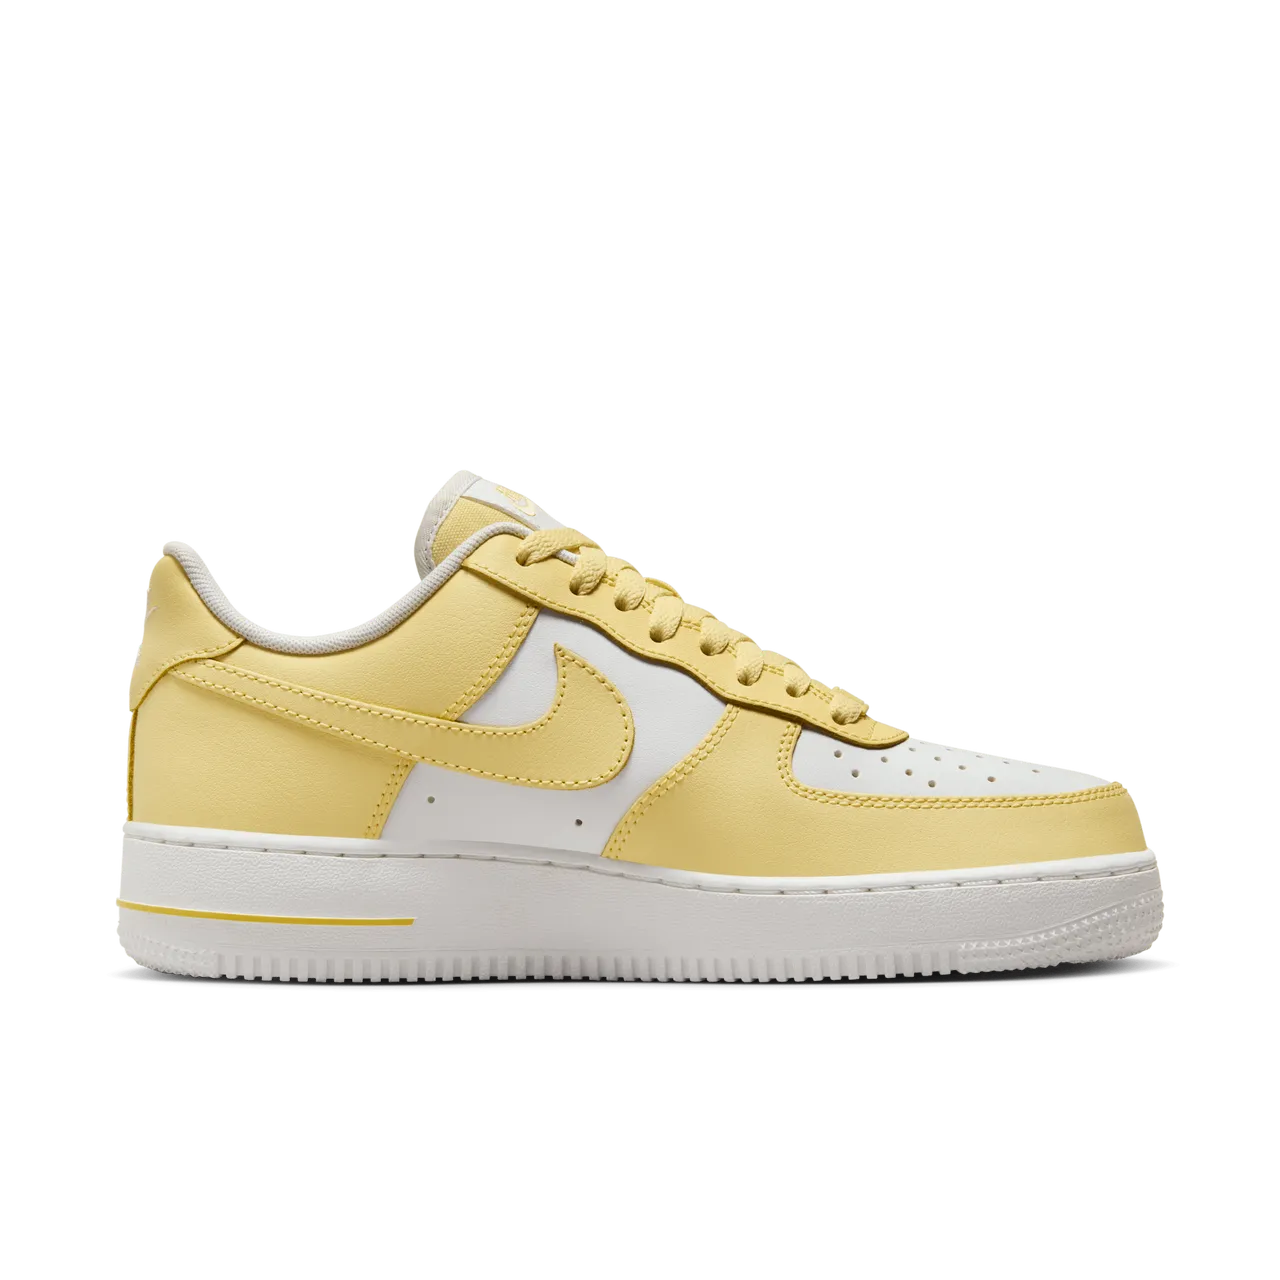 Nike Air Force 1 '07 Women's Shoes - Yellow - Leather